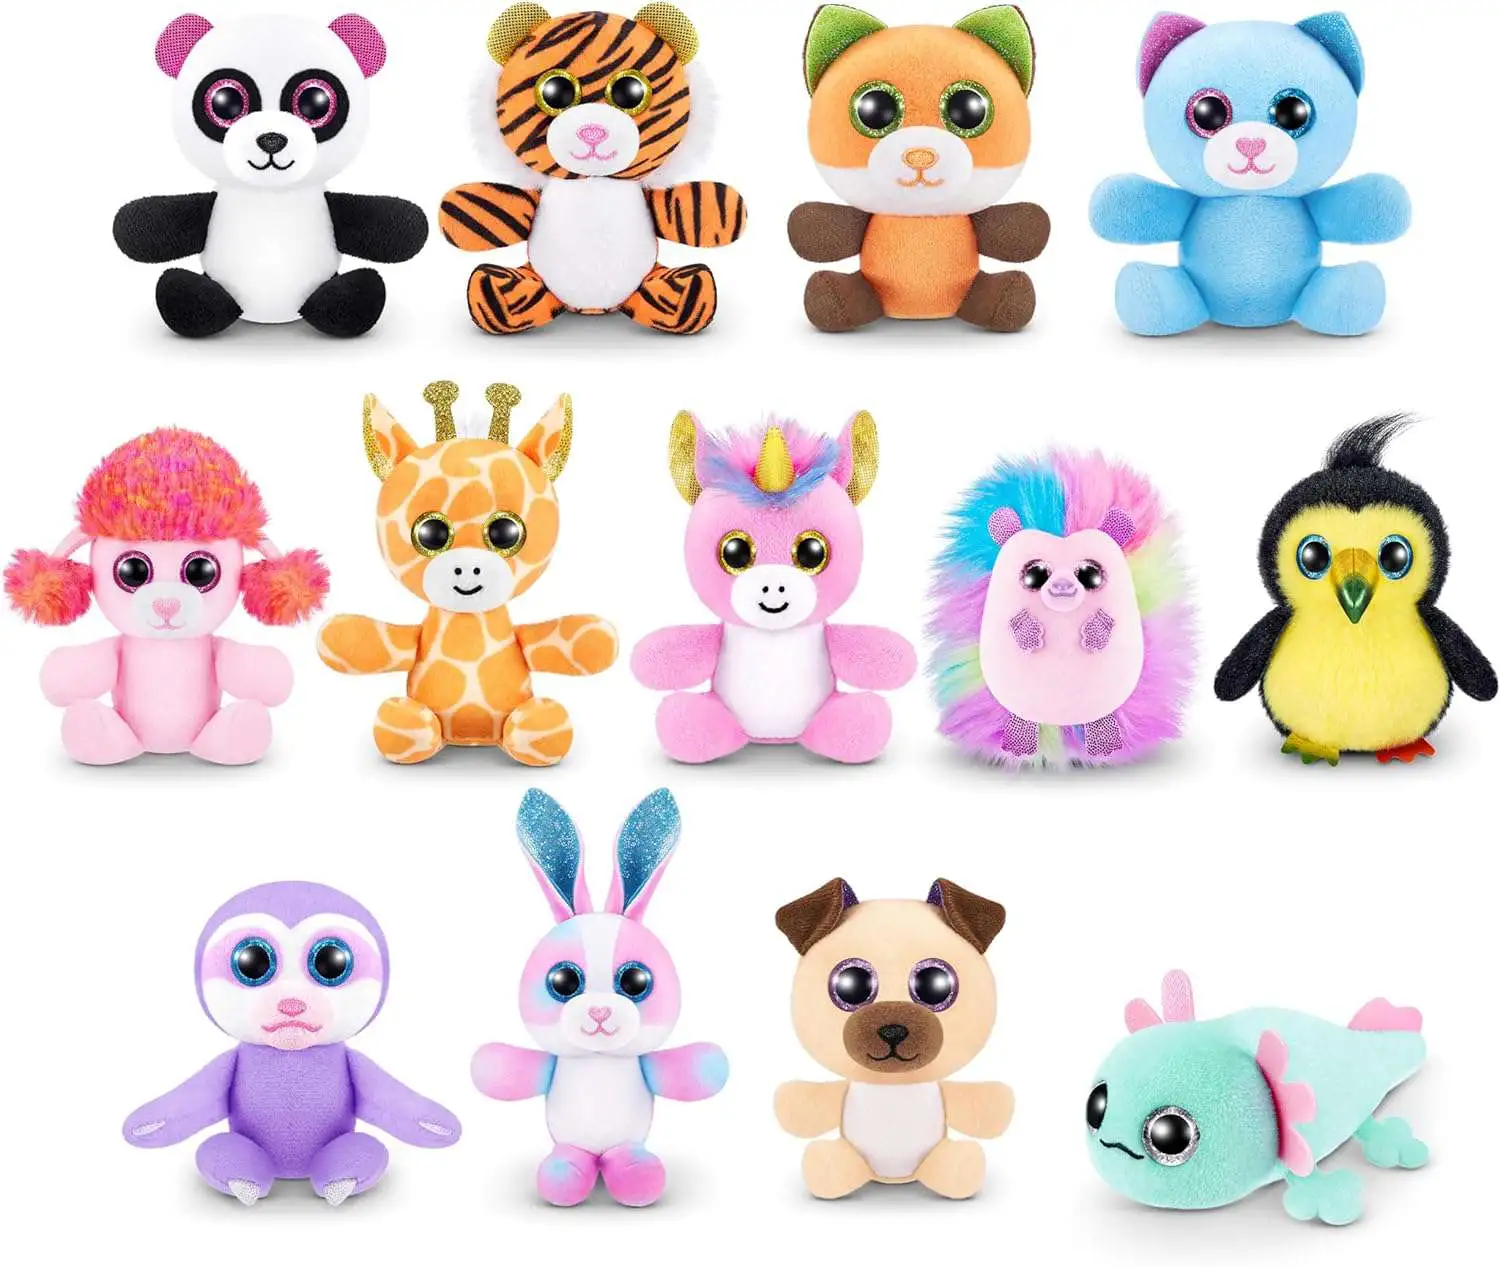 Very cute plushies in this one. #plushypets #unboxing #mysterytoy #bli